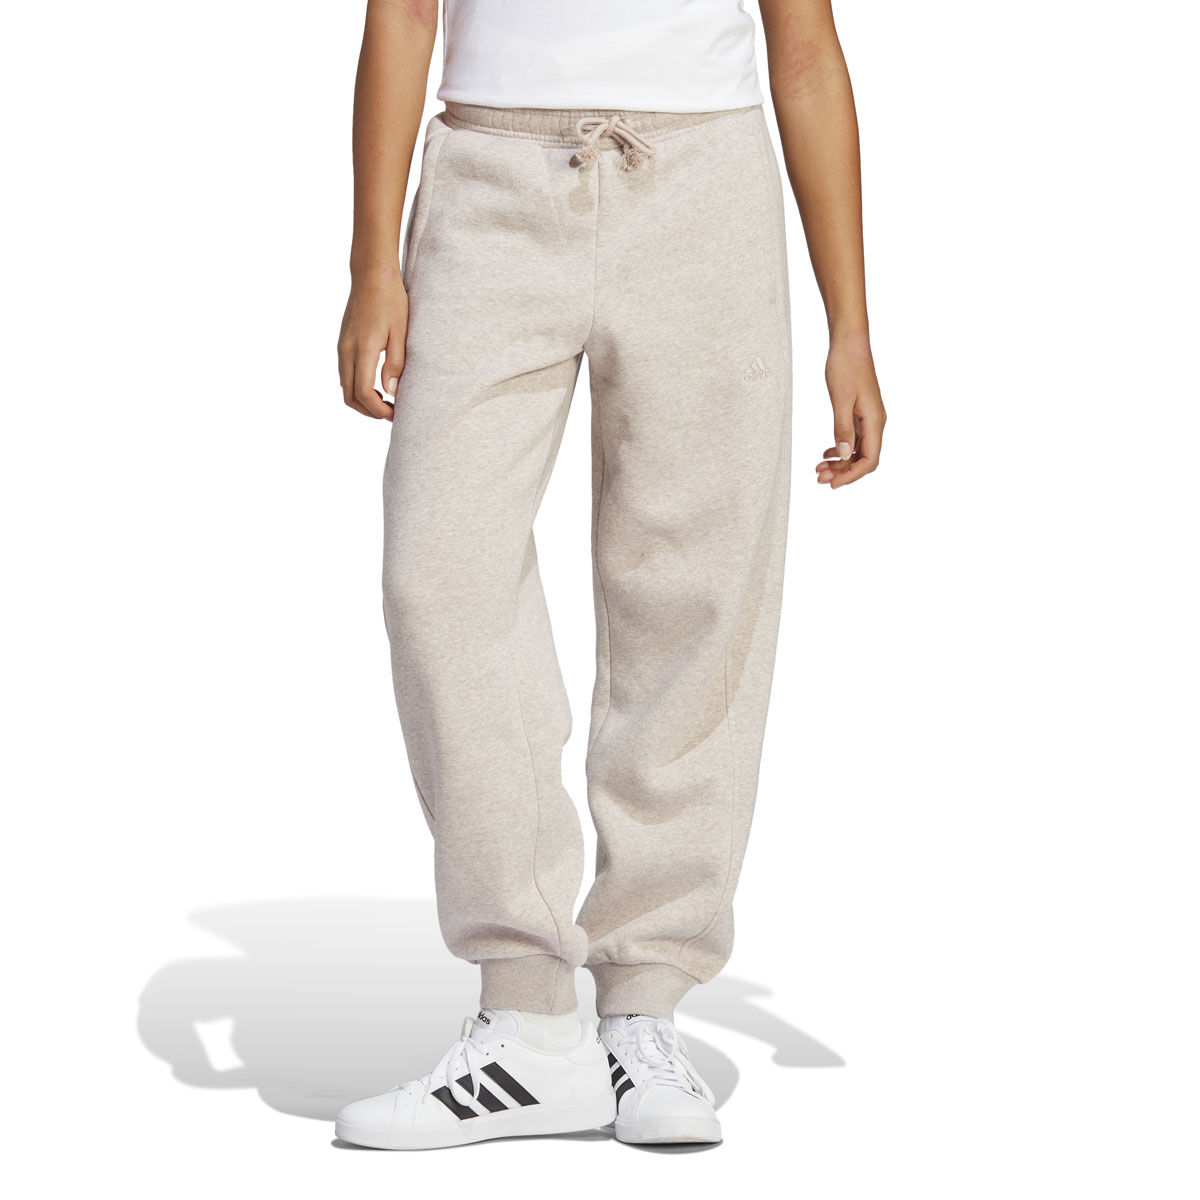 adidas Womens ALL SZN Fleece Jogger Pants Taupe S, Taupe, rebel_hi-res